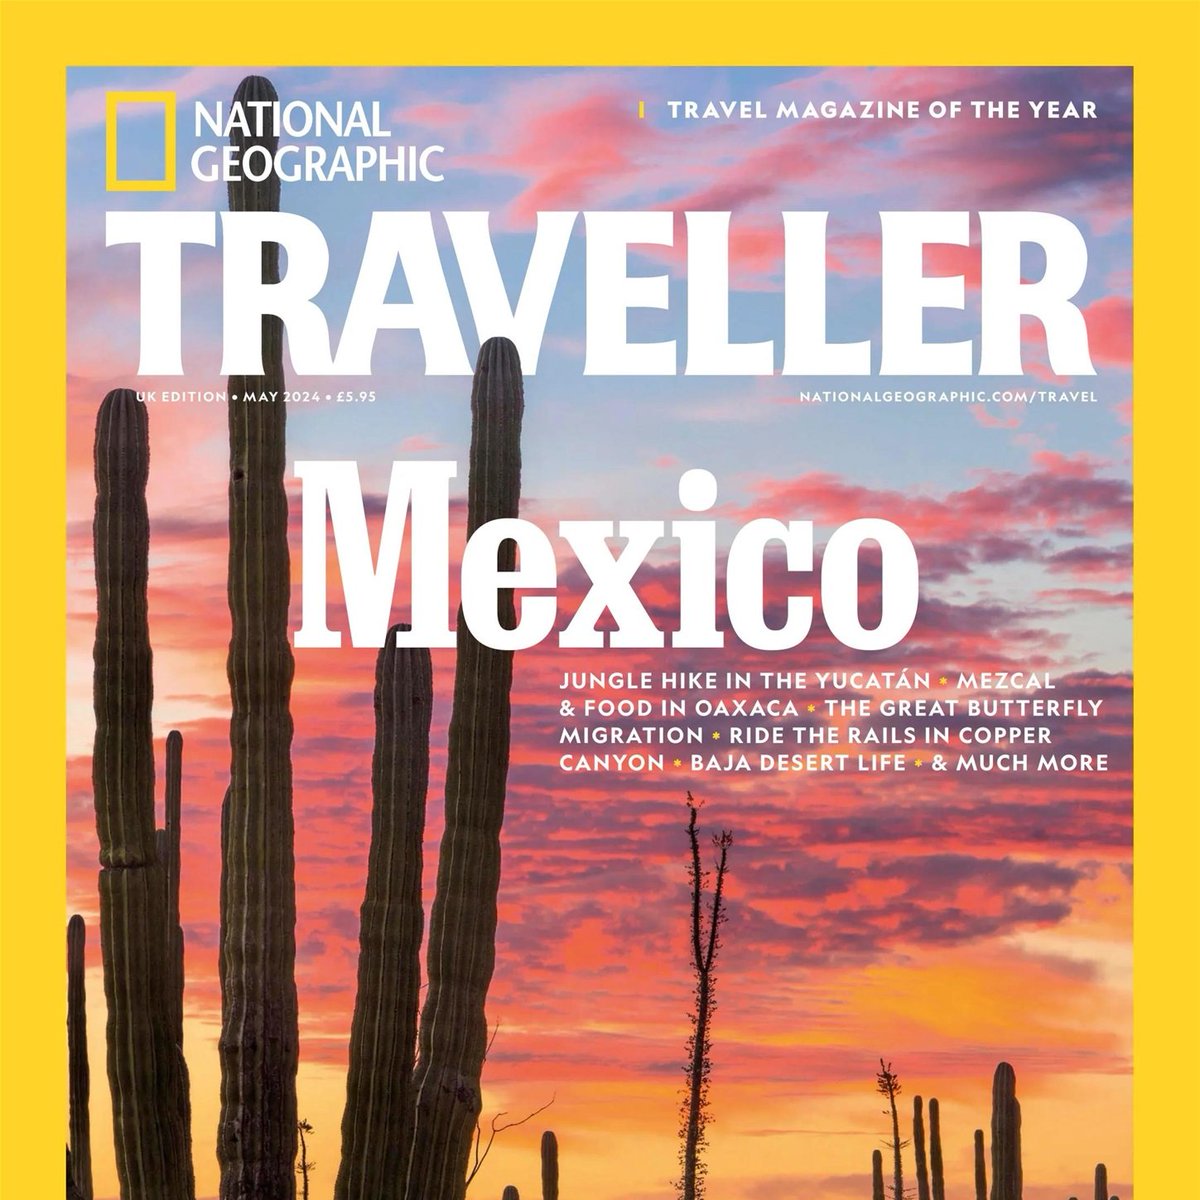 Satisfy your wanderlust with @NatGeoTravelUK 🌍✈️

Subscribe for breathtaking destinations, cultural insights, and travel inspiration. Your adventure awaits!

Shop now 👉 magazine.co.uk/magazines/nati…

#nationalgeographictraveller #natgeotraveller #travel #culture #placestovisit